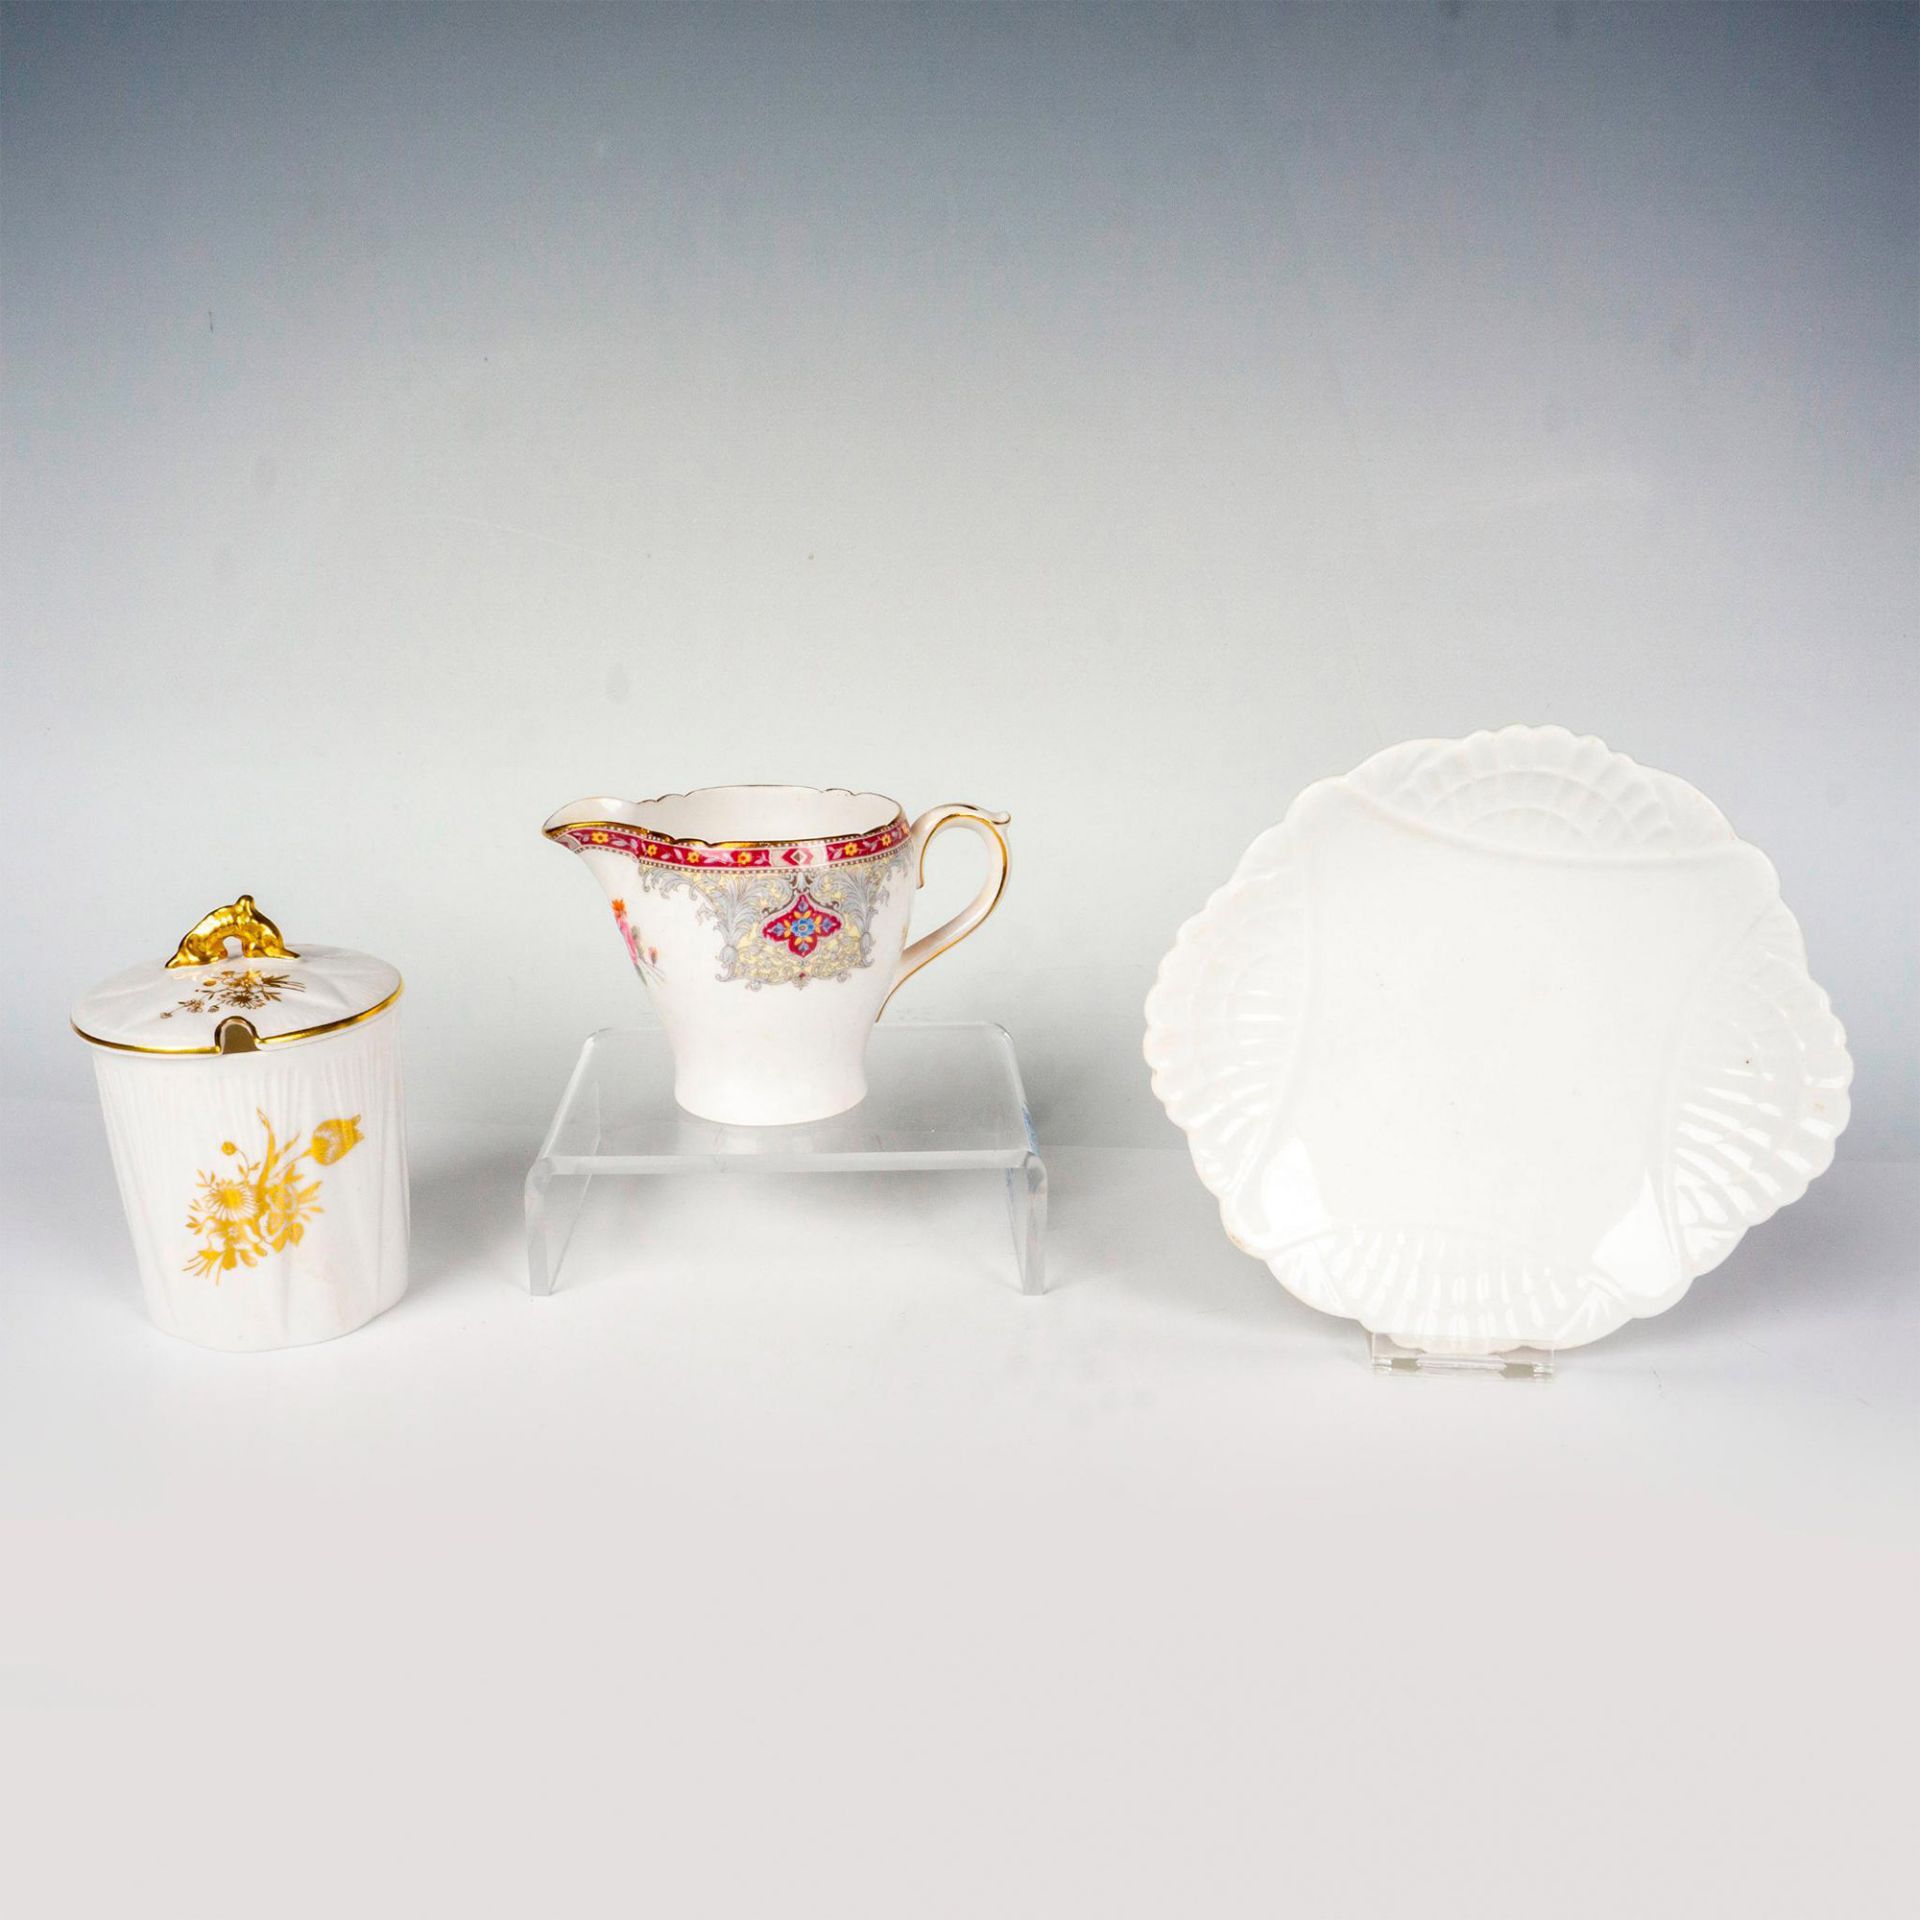 3pc Shelly China Serving Set, White and Gold Motif